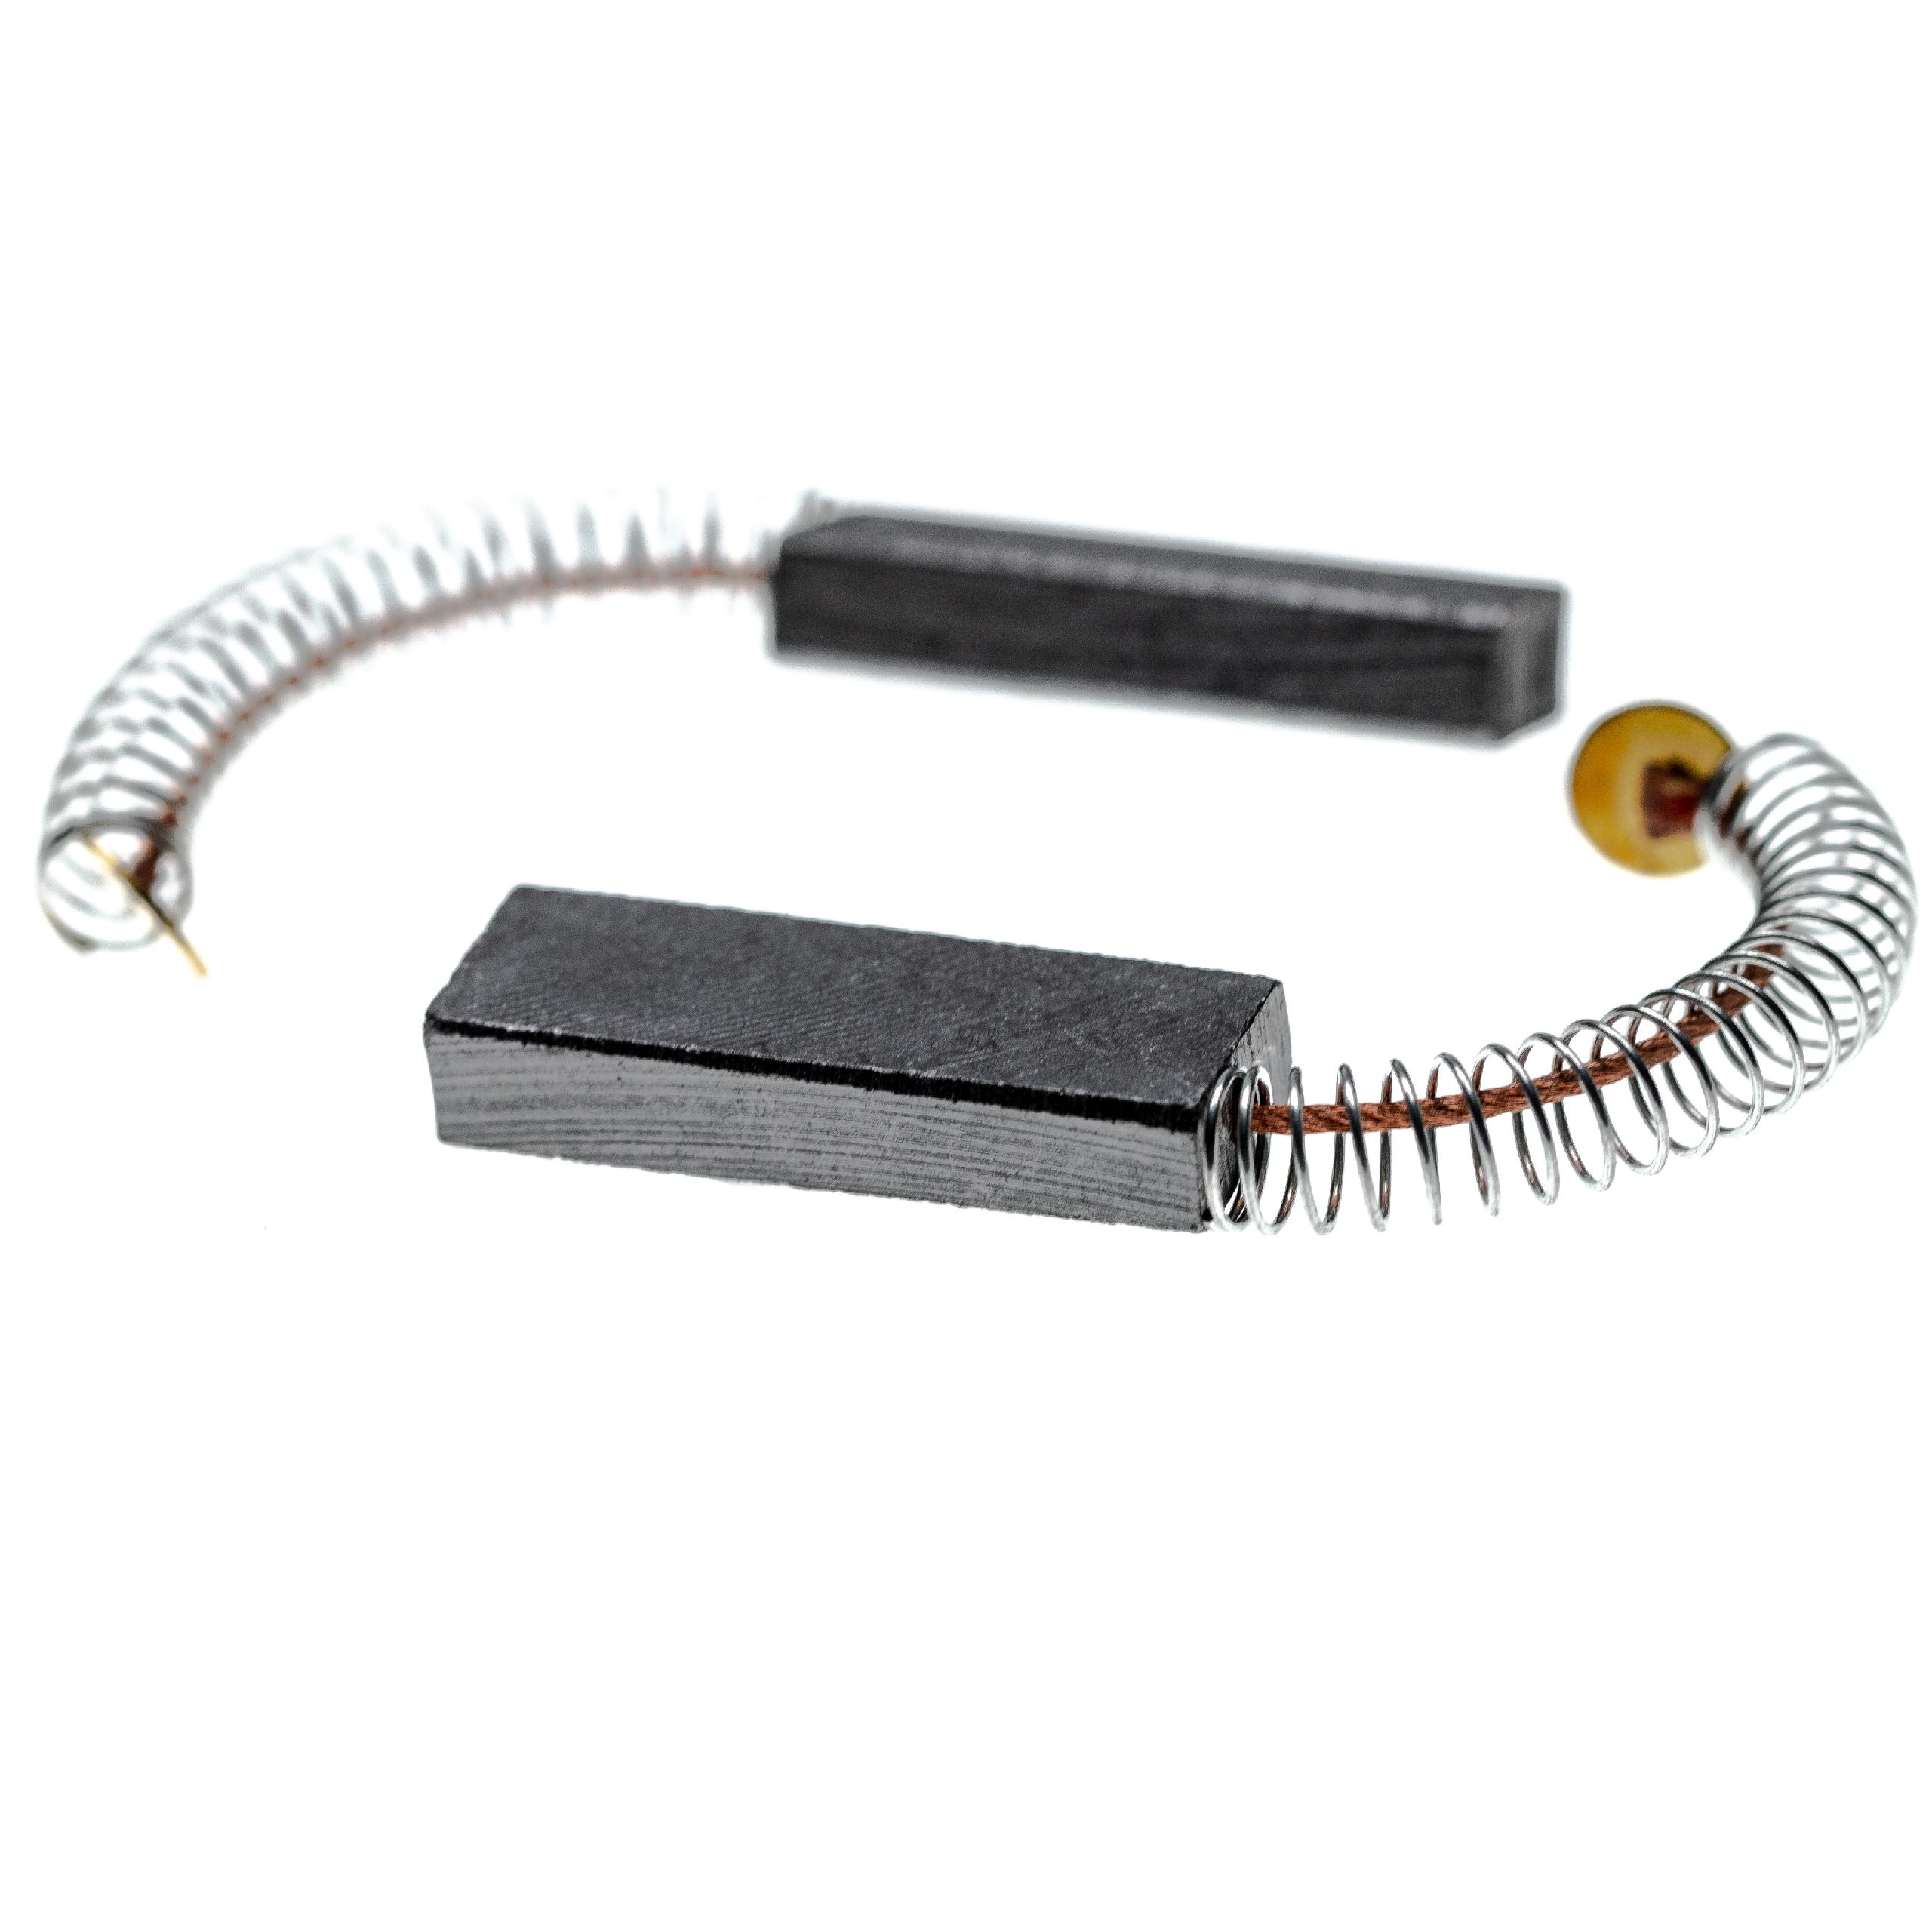 2x Carbon Brush as Replacement for Makita W49625 Vacuum Cleaner + Spring, 31.7 x 10.8 x 5.8mm